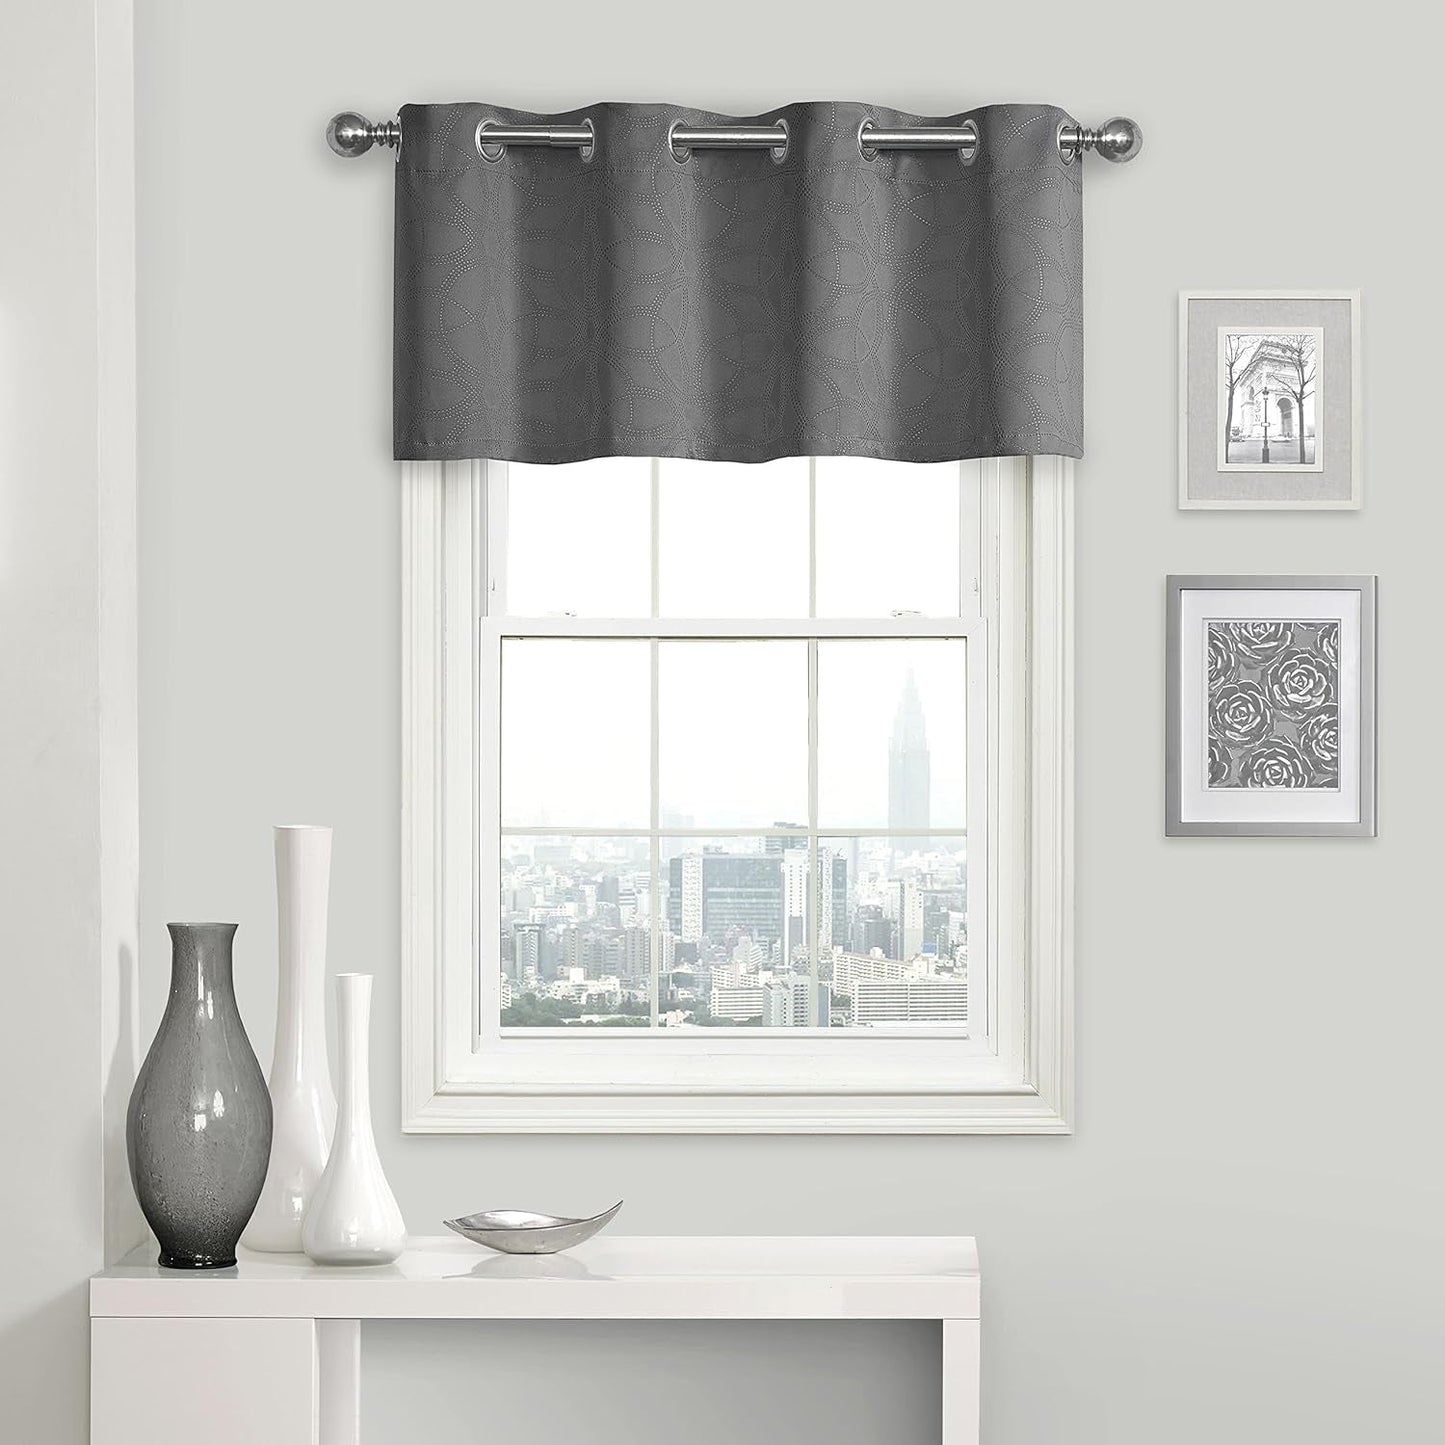 Eclipse Kingston Grommet Top Curtains for -Kitchen and Living Room, 52" X 18", Navy